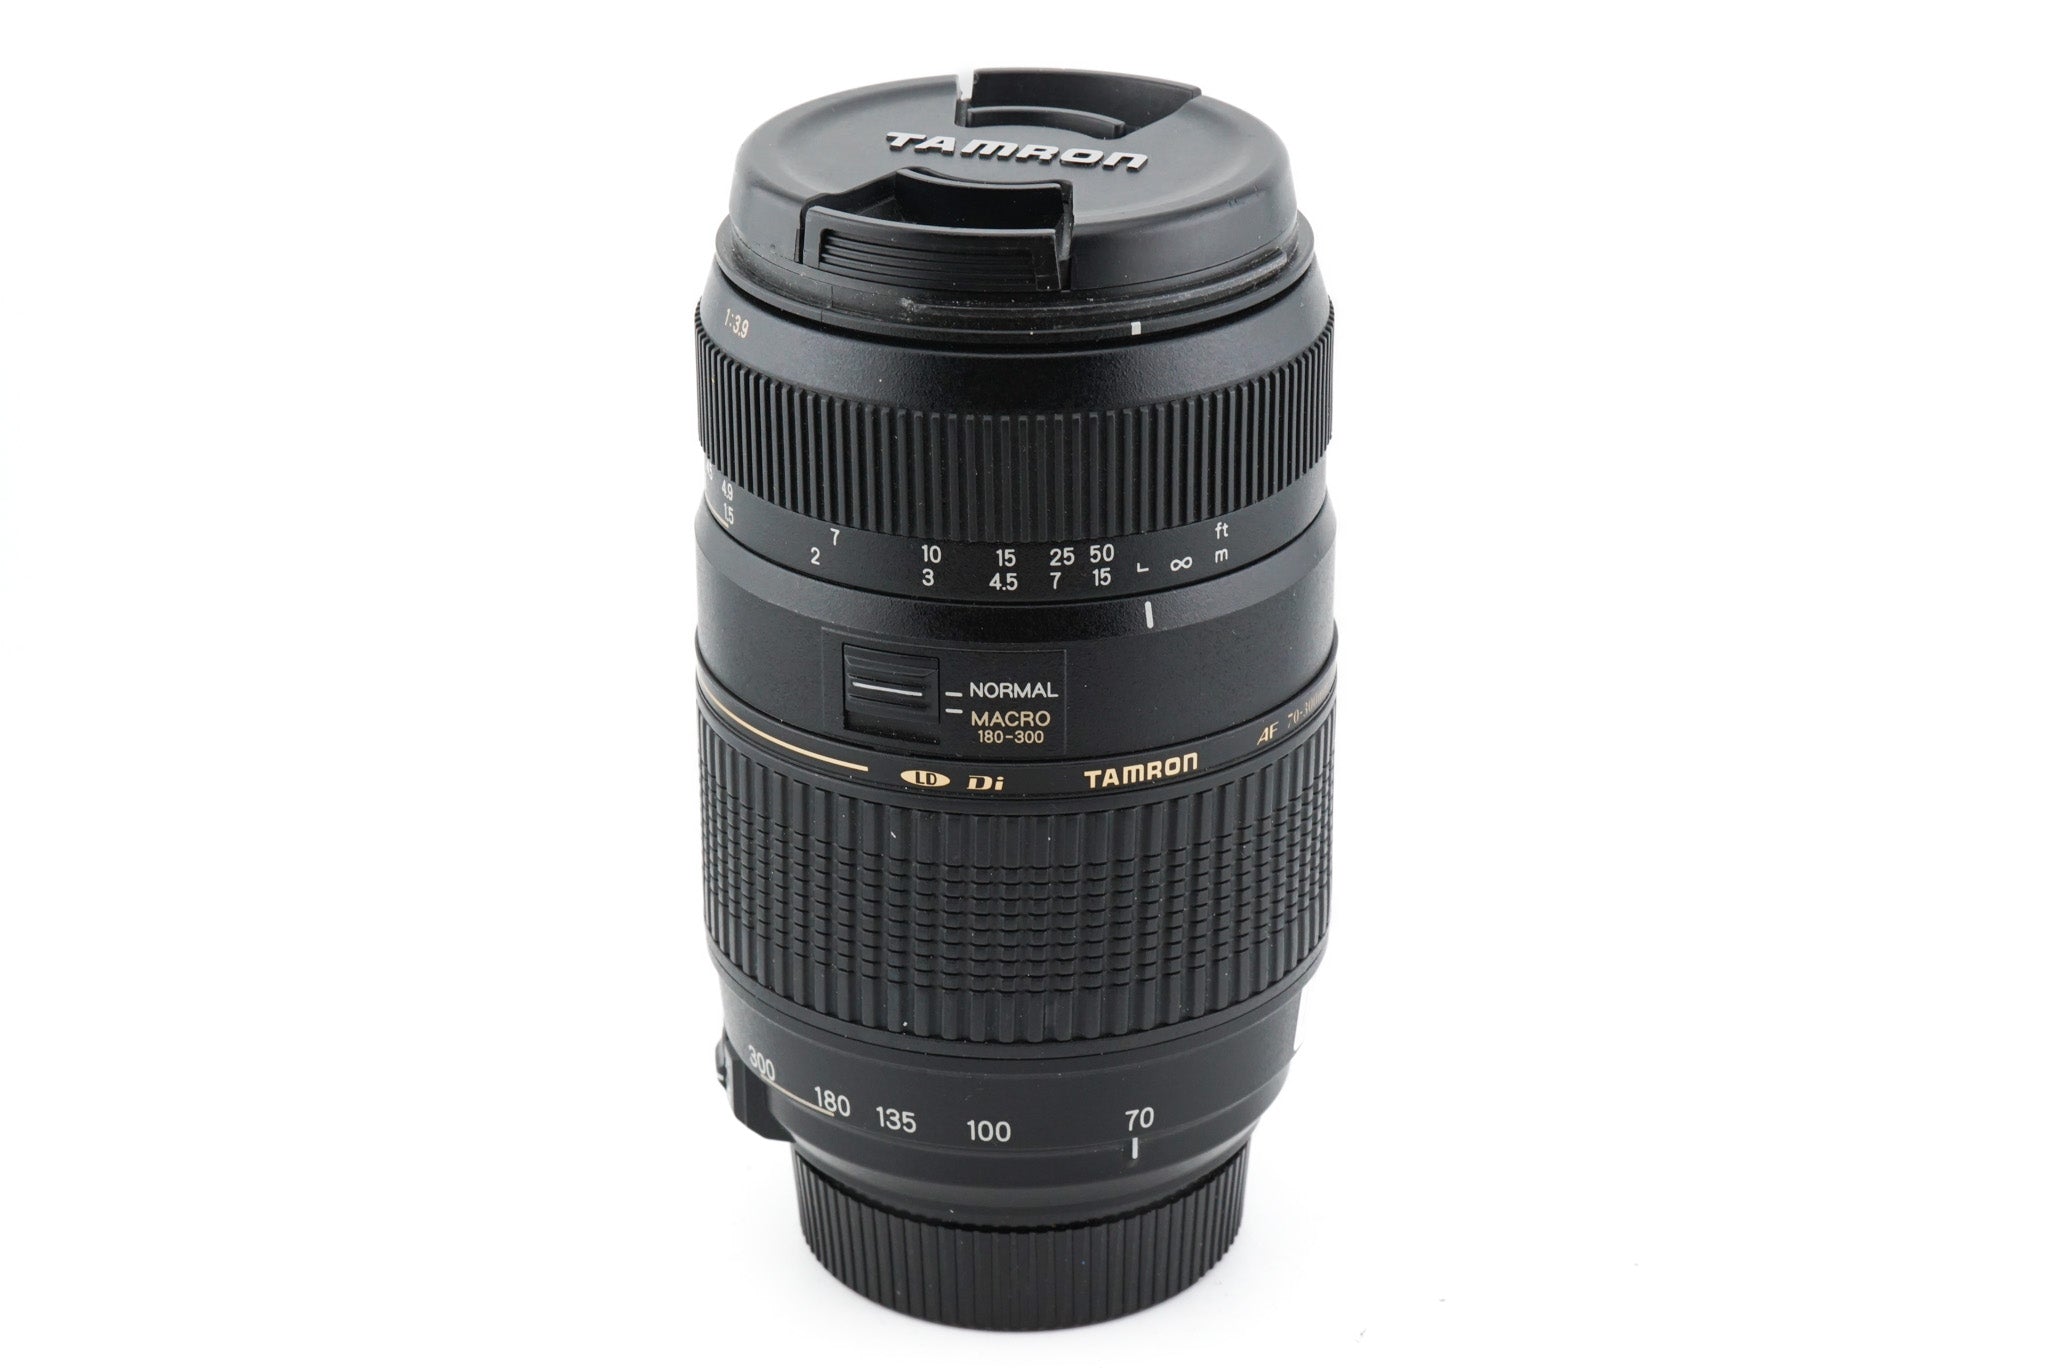 TAMRON LD Di AF 70-300mm 4-5.6 A17 ニコン用 - レンズ(ズーム)